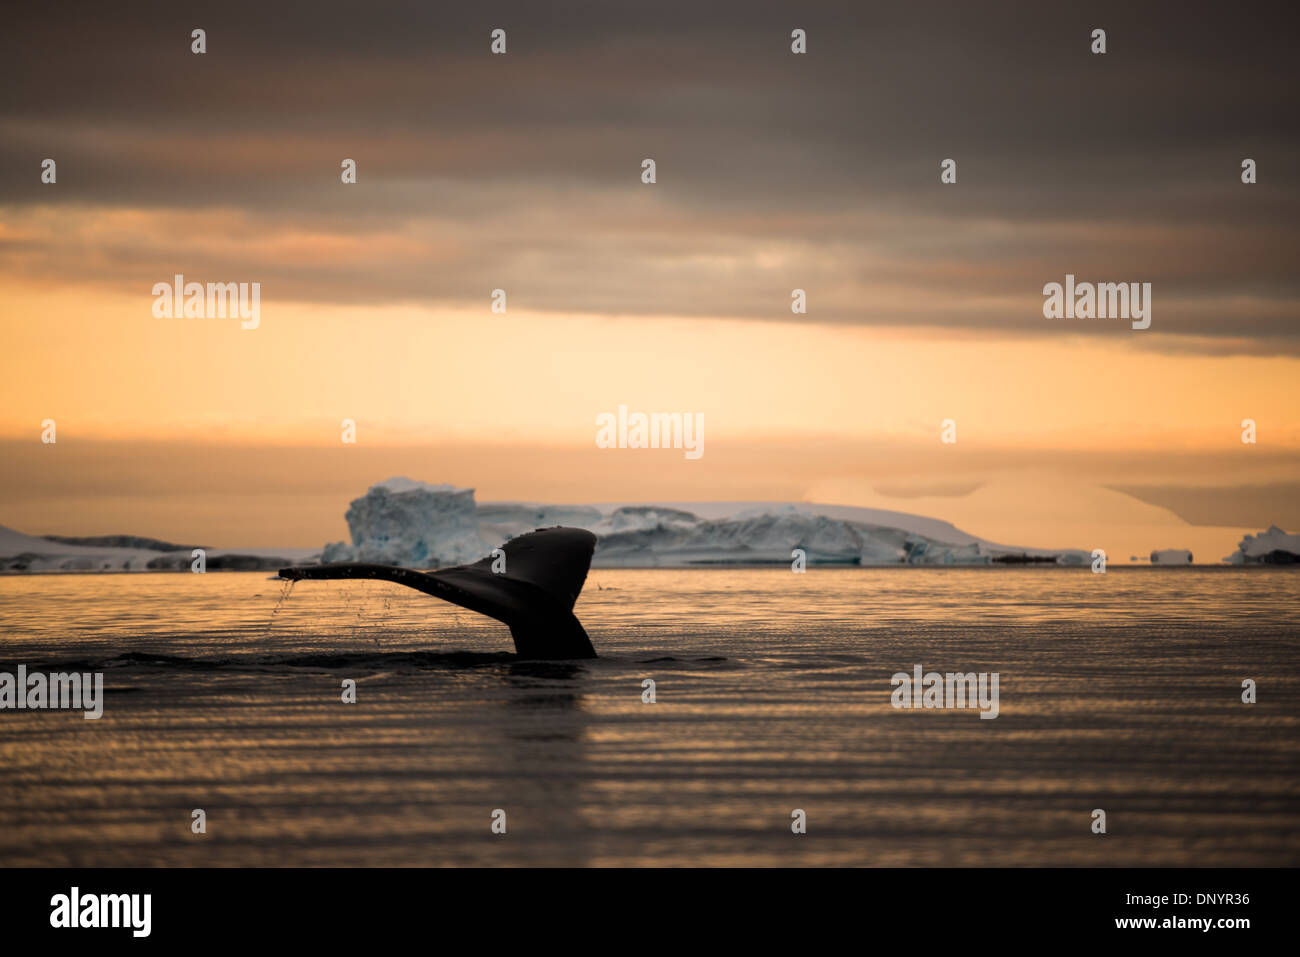 A humpback whale breaks the surface against the orange glow of the setting sun in Hughes Bay on the Antarctic Peninsula. Stock Photo